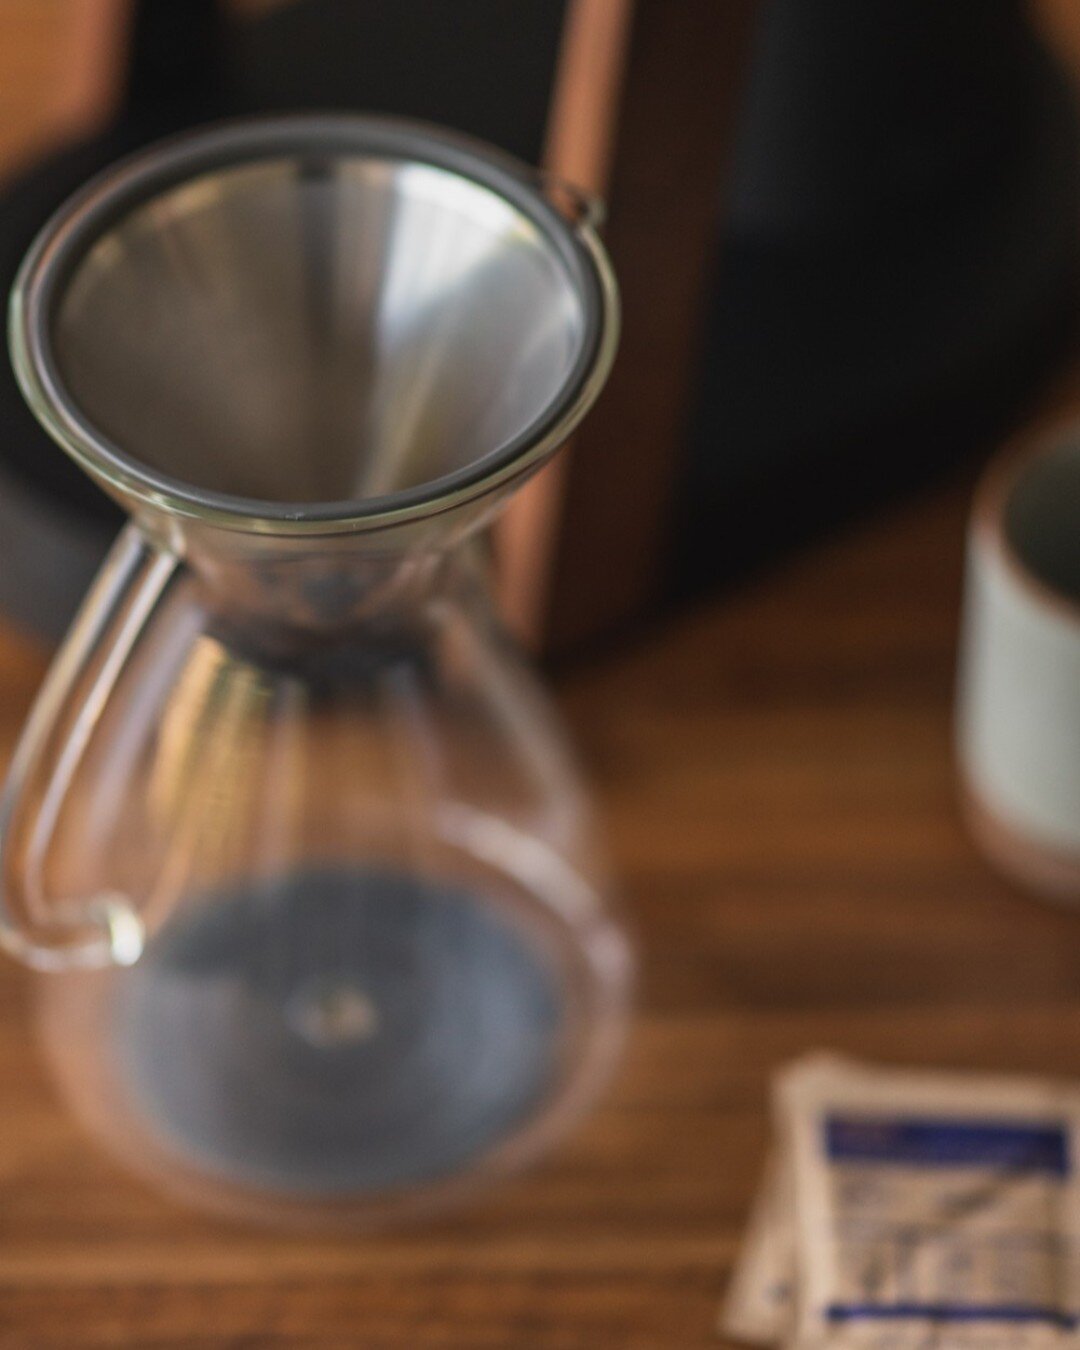 While living up to the rigorous standards of the best cafes, the Kone makes brewing delicious pour over coffee at home a breeze.
.
.
.
#ablebrewing #ablekone #coffee #coffeefilter #butfirstcoffee #coffeecommunity #morethanacup #coffeebreak #homebaris